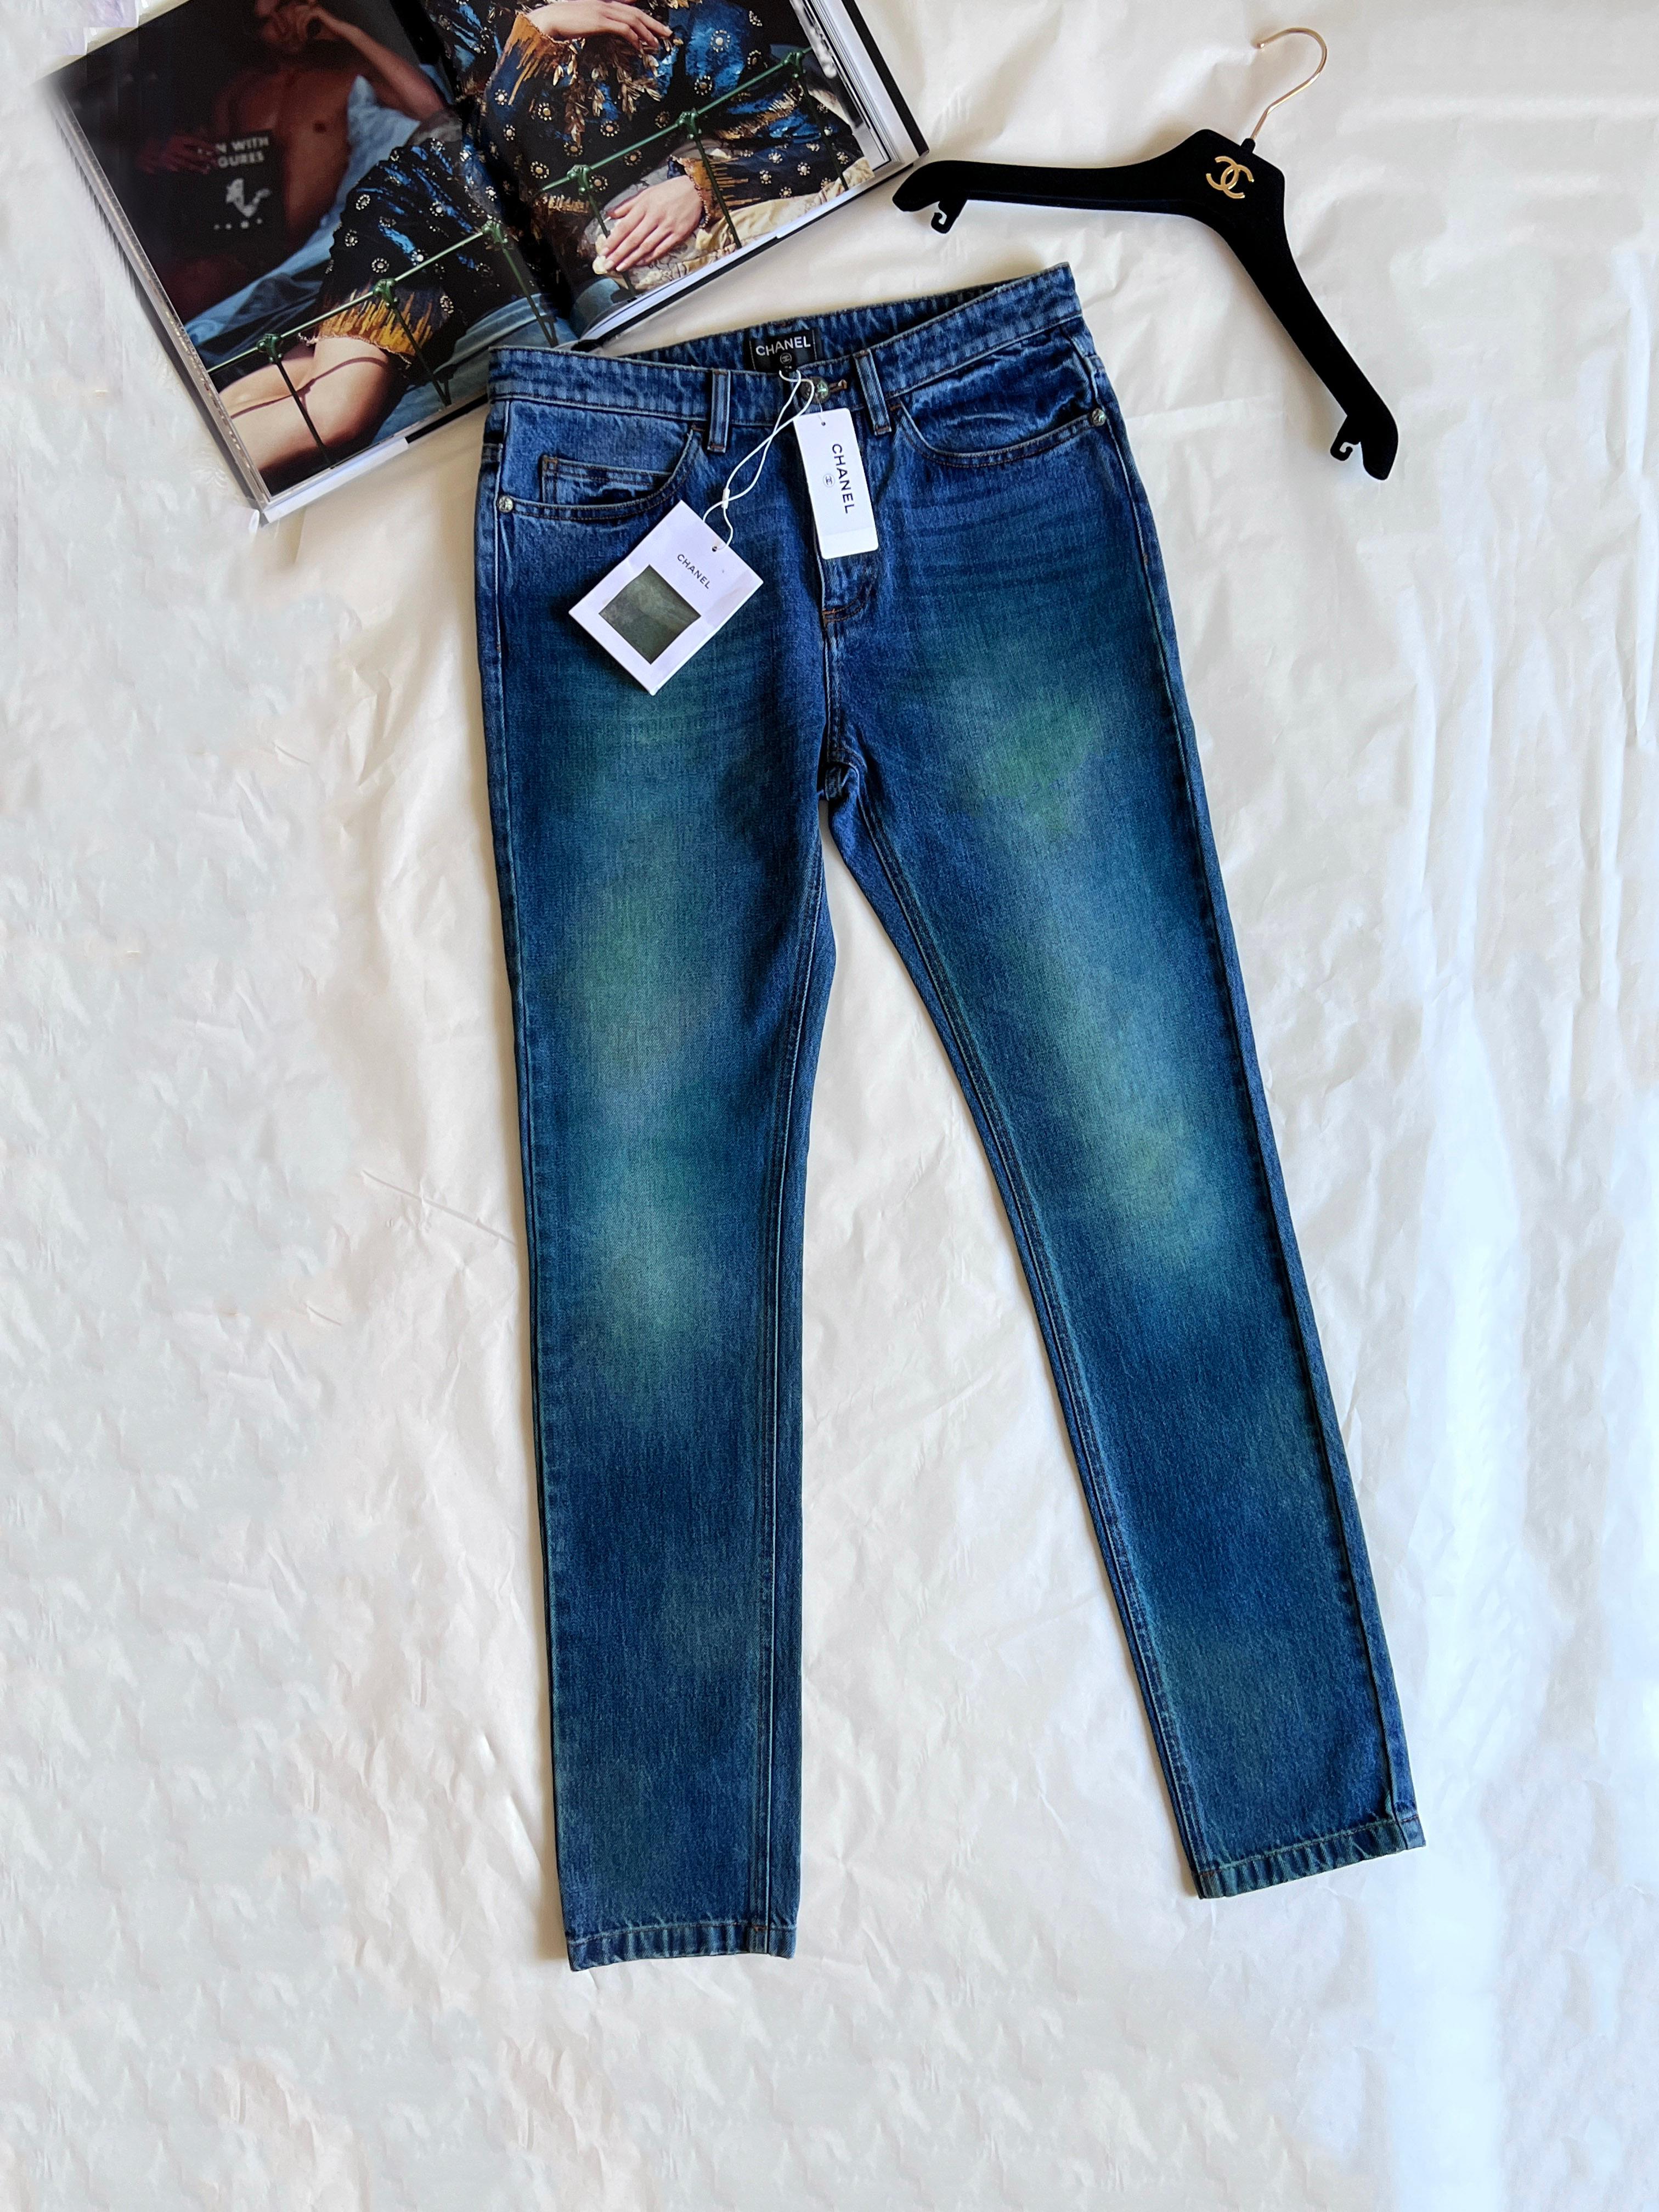 Chanel Cuba Collection Runway Jeans 2